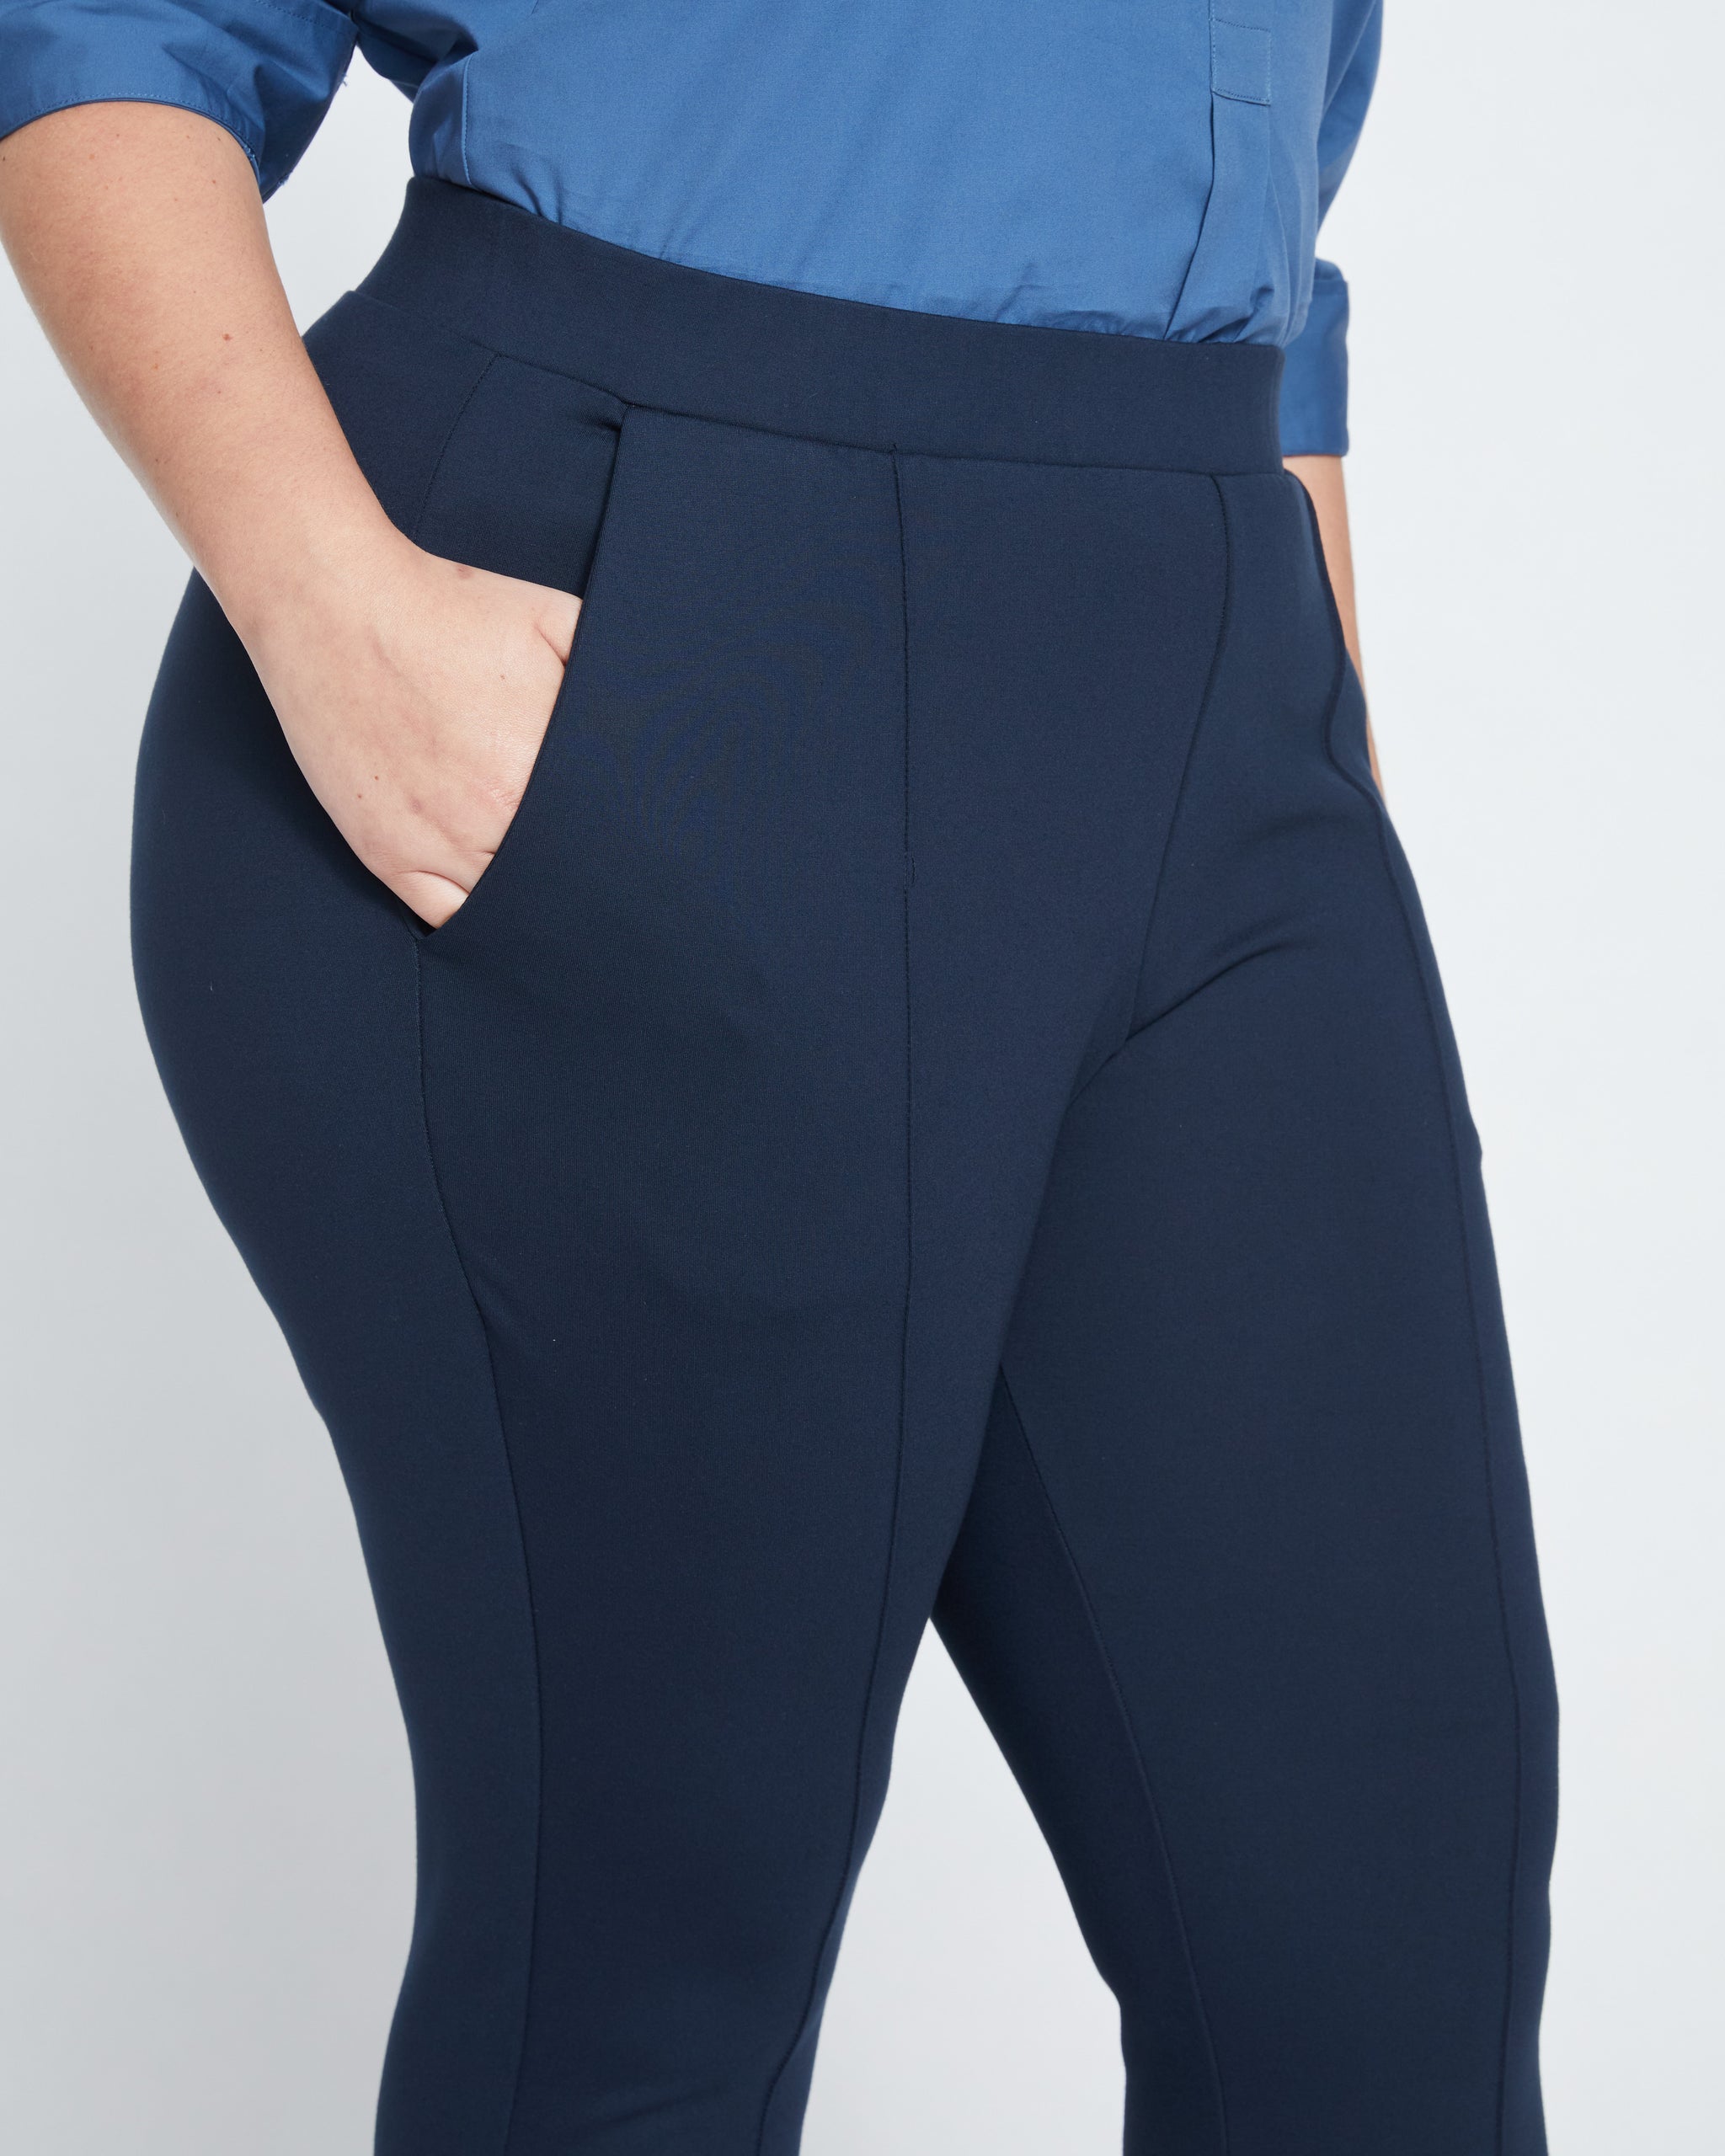 The Icon Ponte Pintuck Trouser Pant